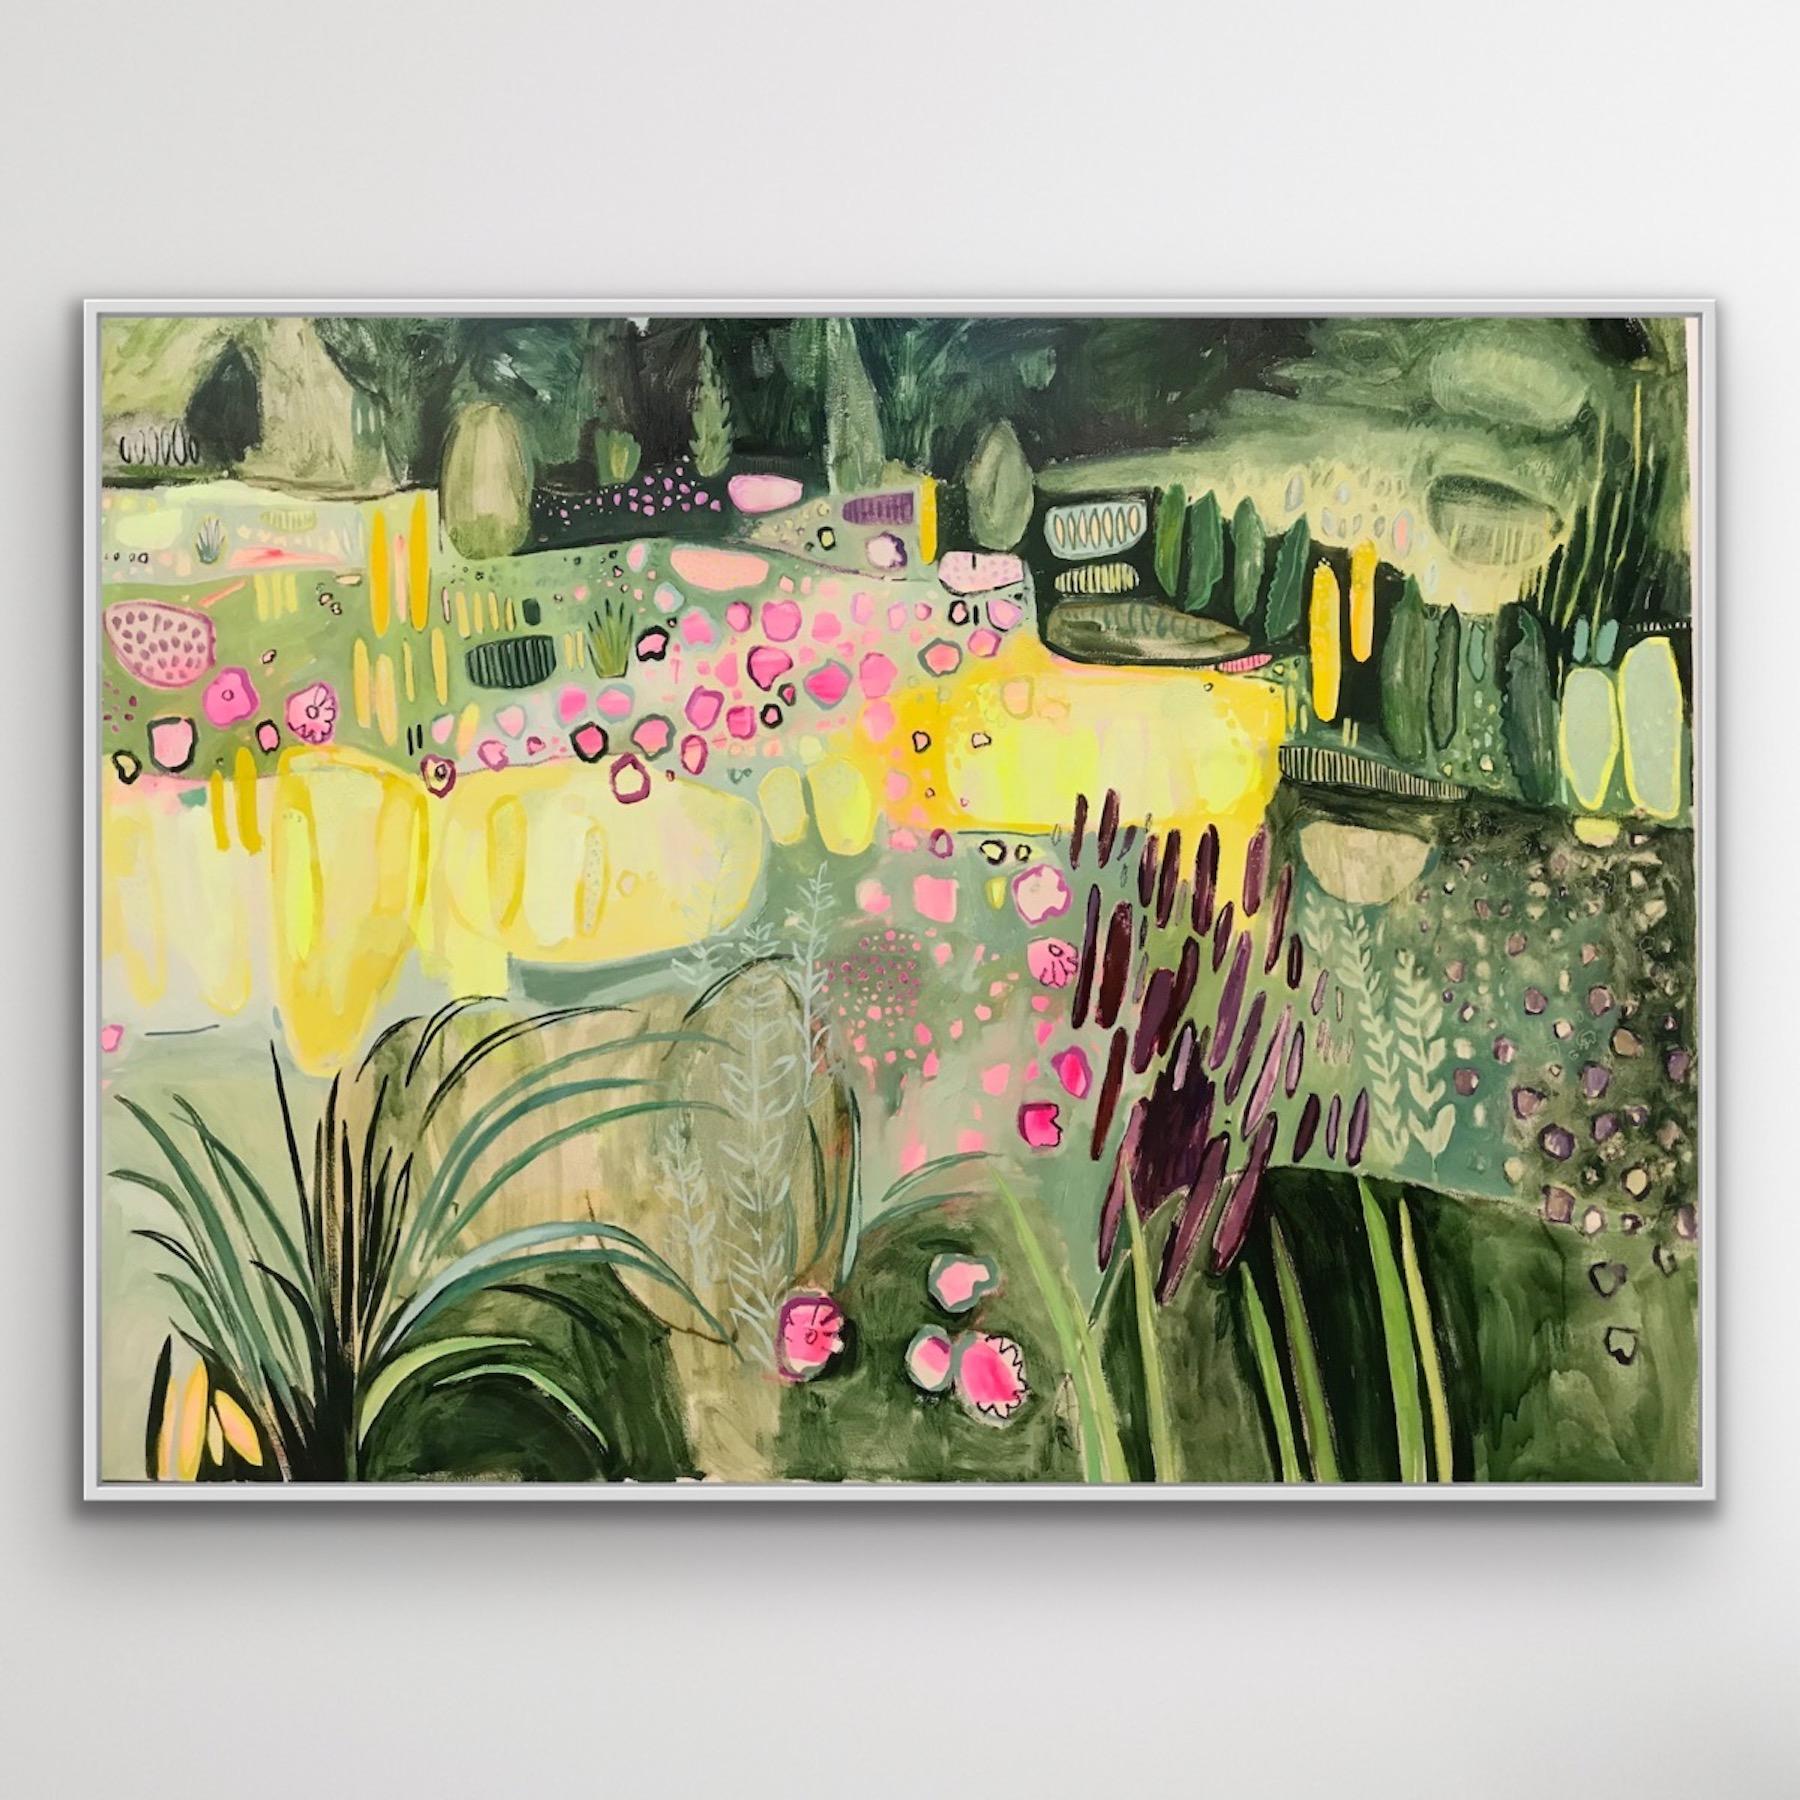 Large Merton Beds 4 by Elaine Kazimierczuk
Original and hand signed by the artist 

Original Abstract Landscape Painting
Oil Paint on Canvas
Canvas Size: H 150cm x W 200cm
Sold Framed in a White Float Frame
(Please note that in situ images are